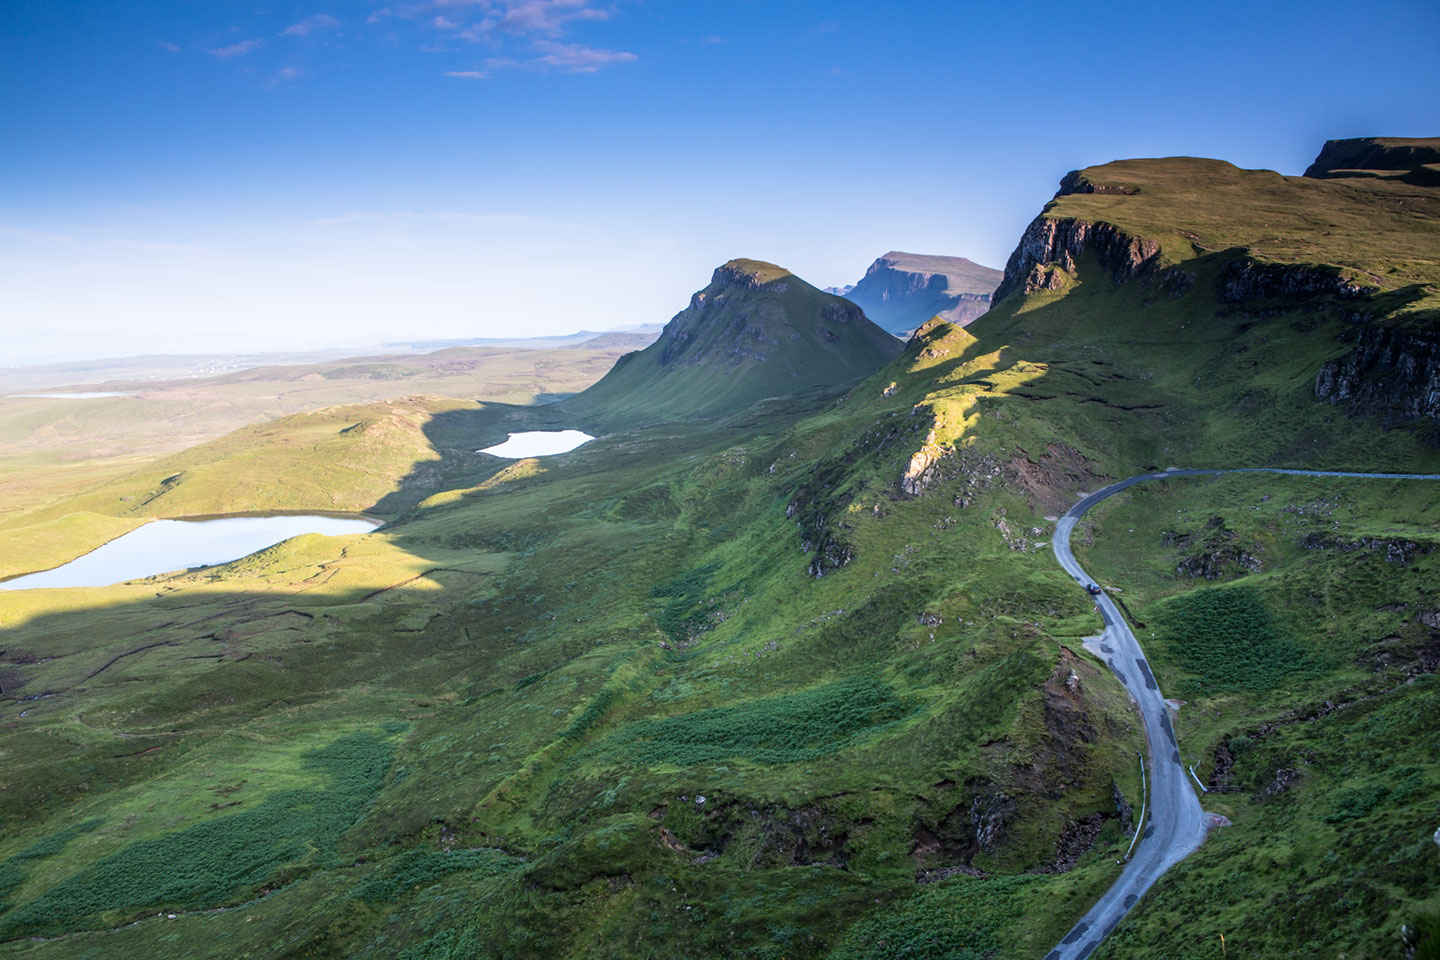 The Quiraing pass at the Isle of Skye in Scotland